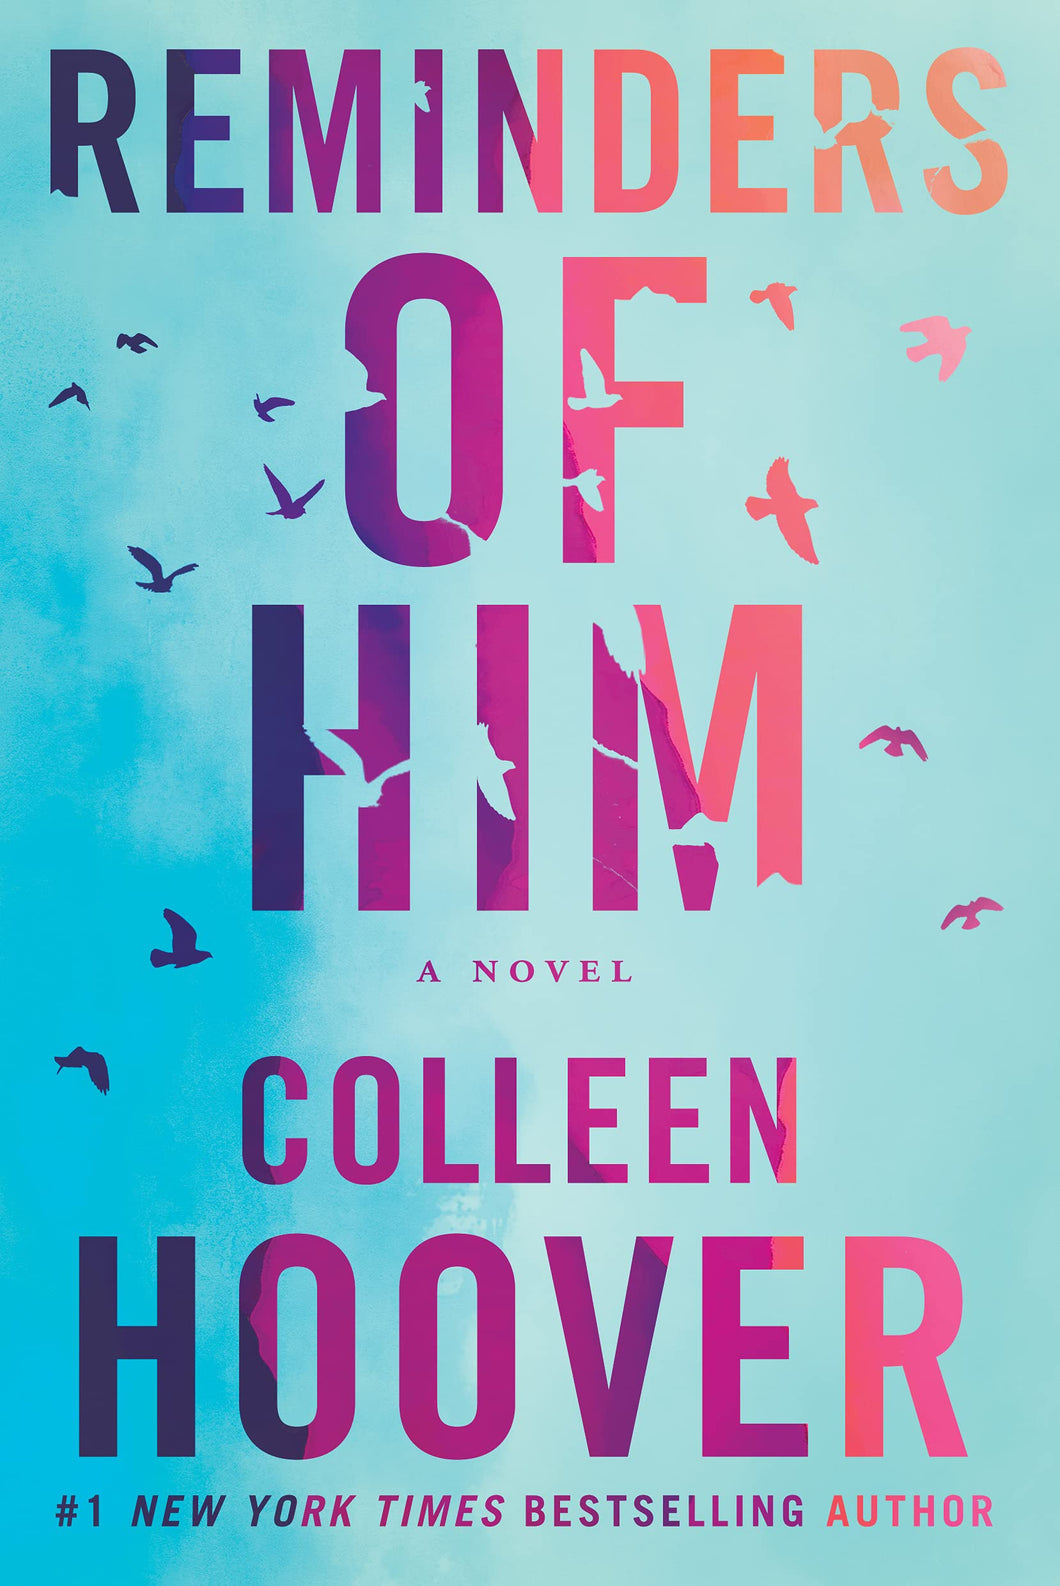 Reminders of Him by Colleen Hoover (PB)